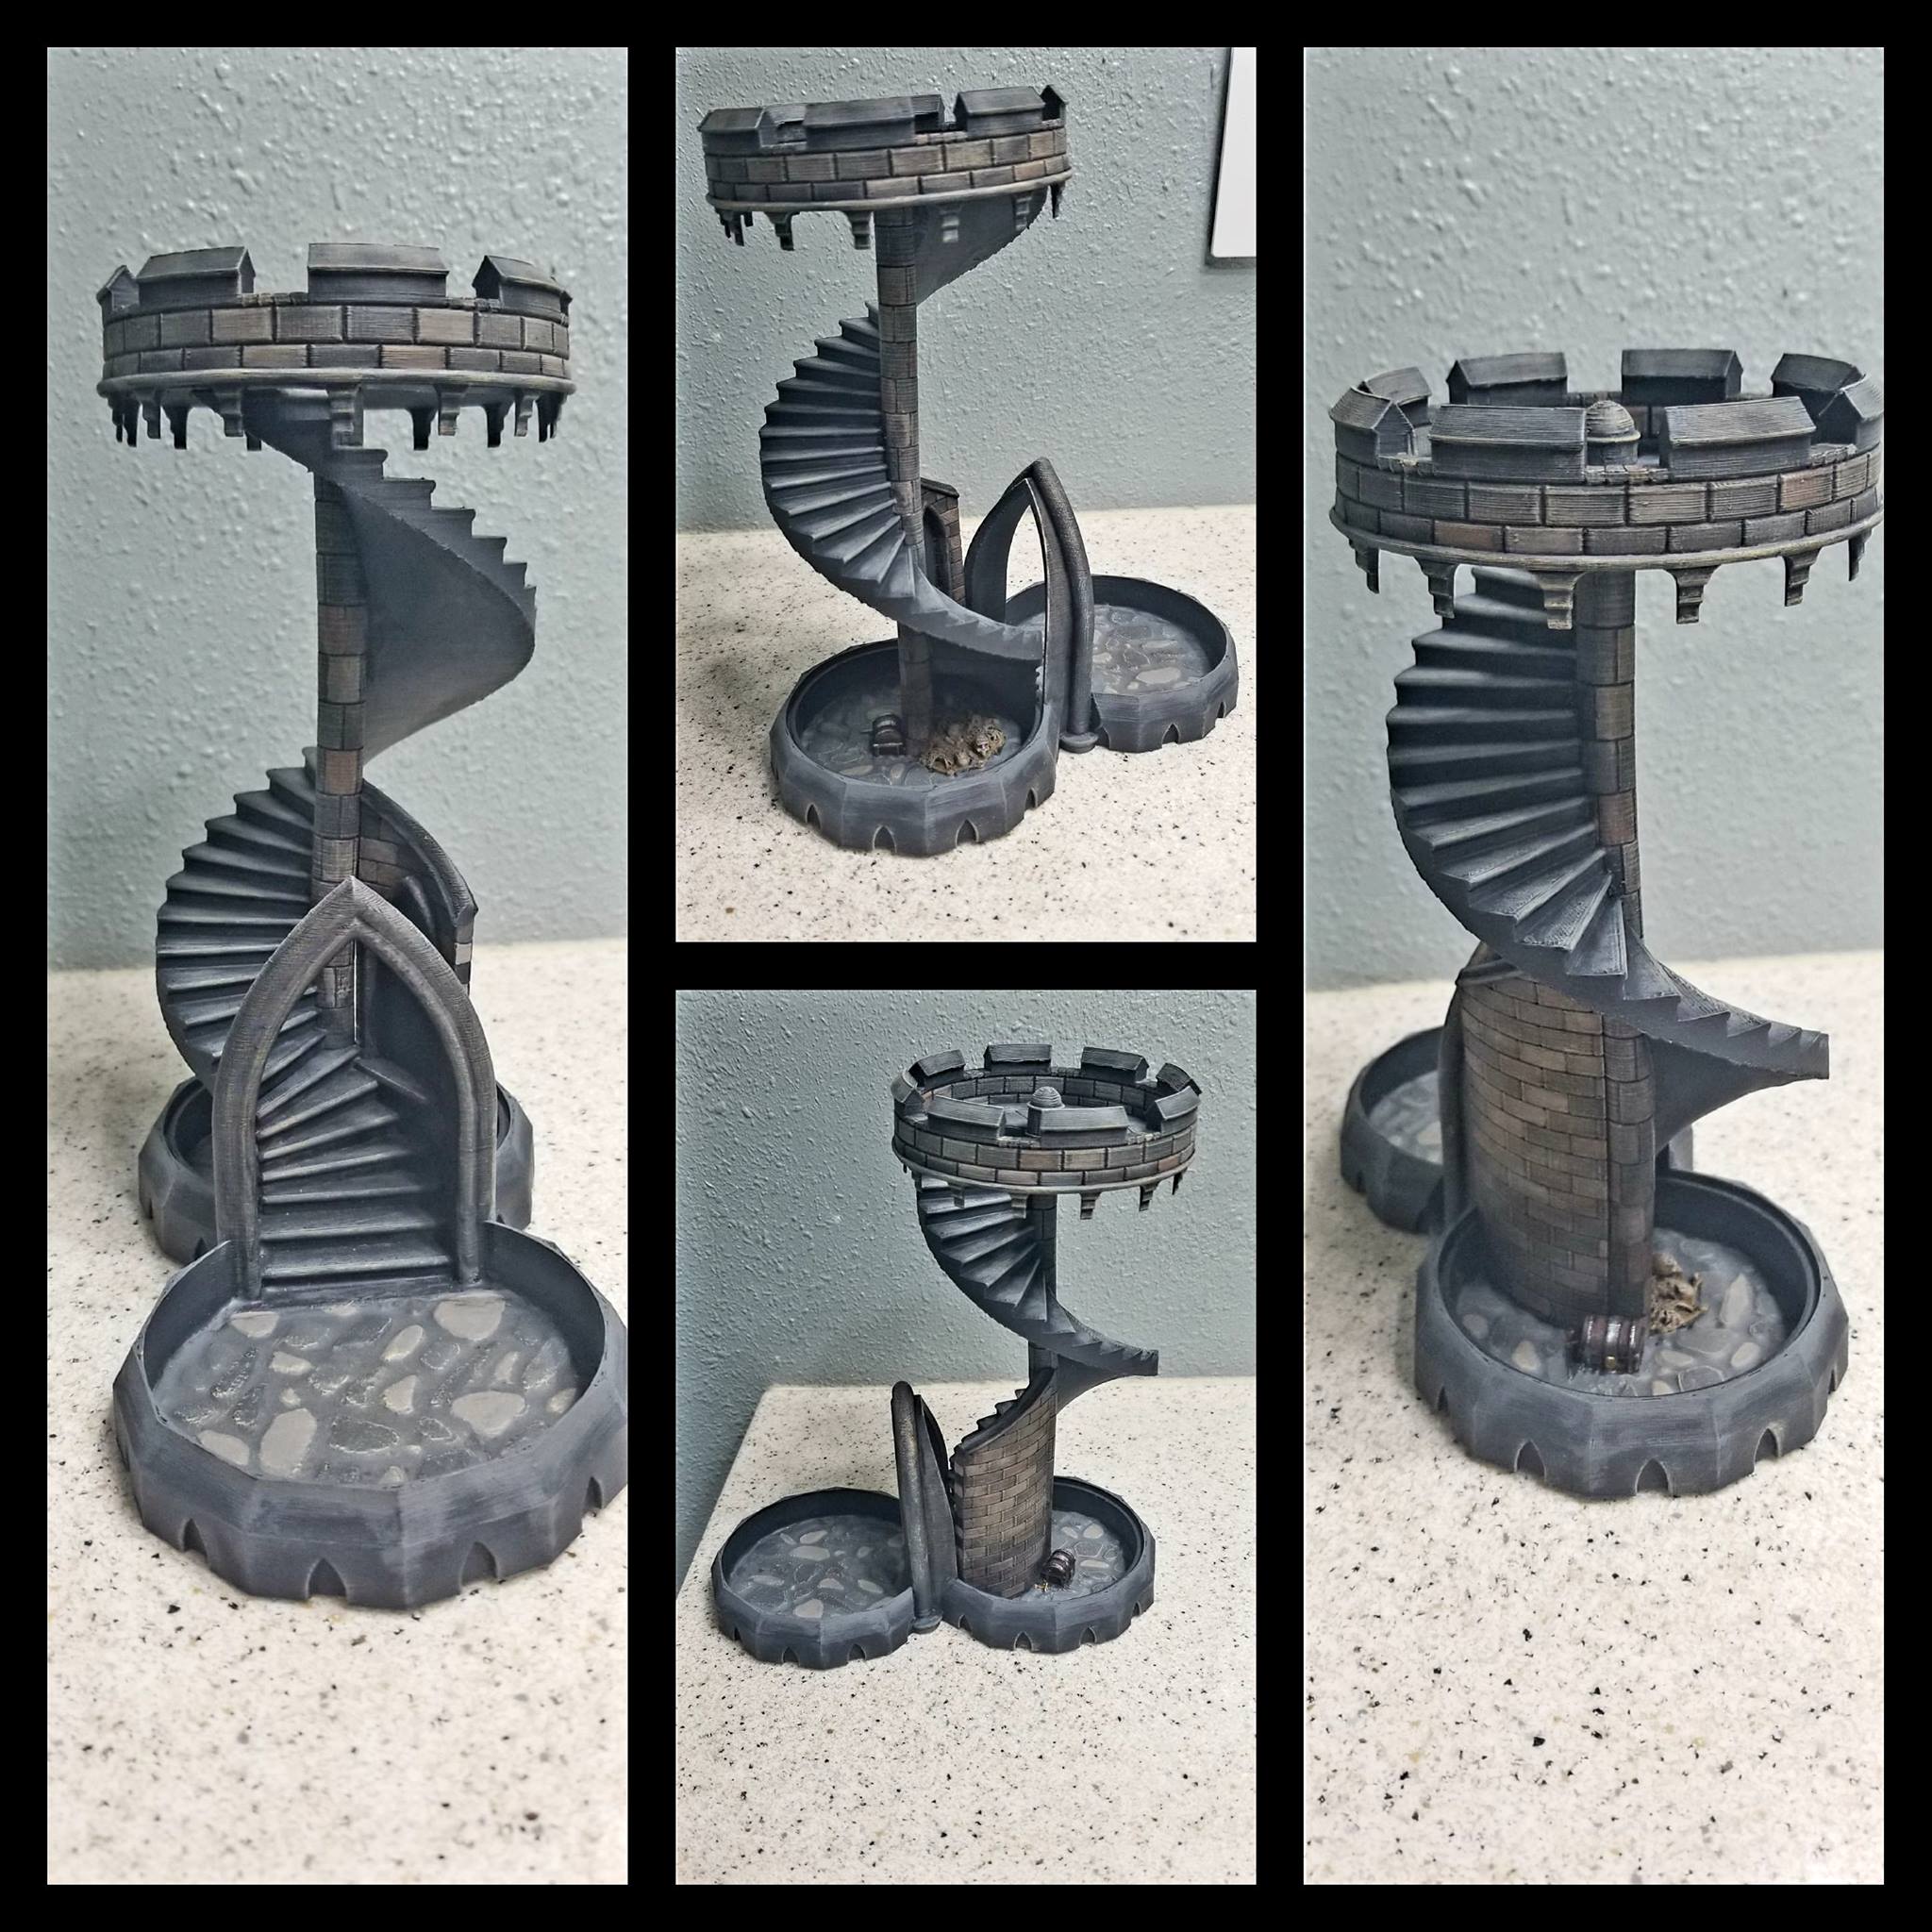 Dice Tower Terrain Fantasy DnD Crate3D The Barons Manse D&D Pathfinder